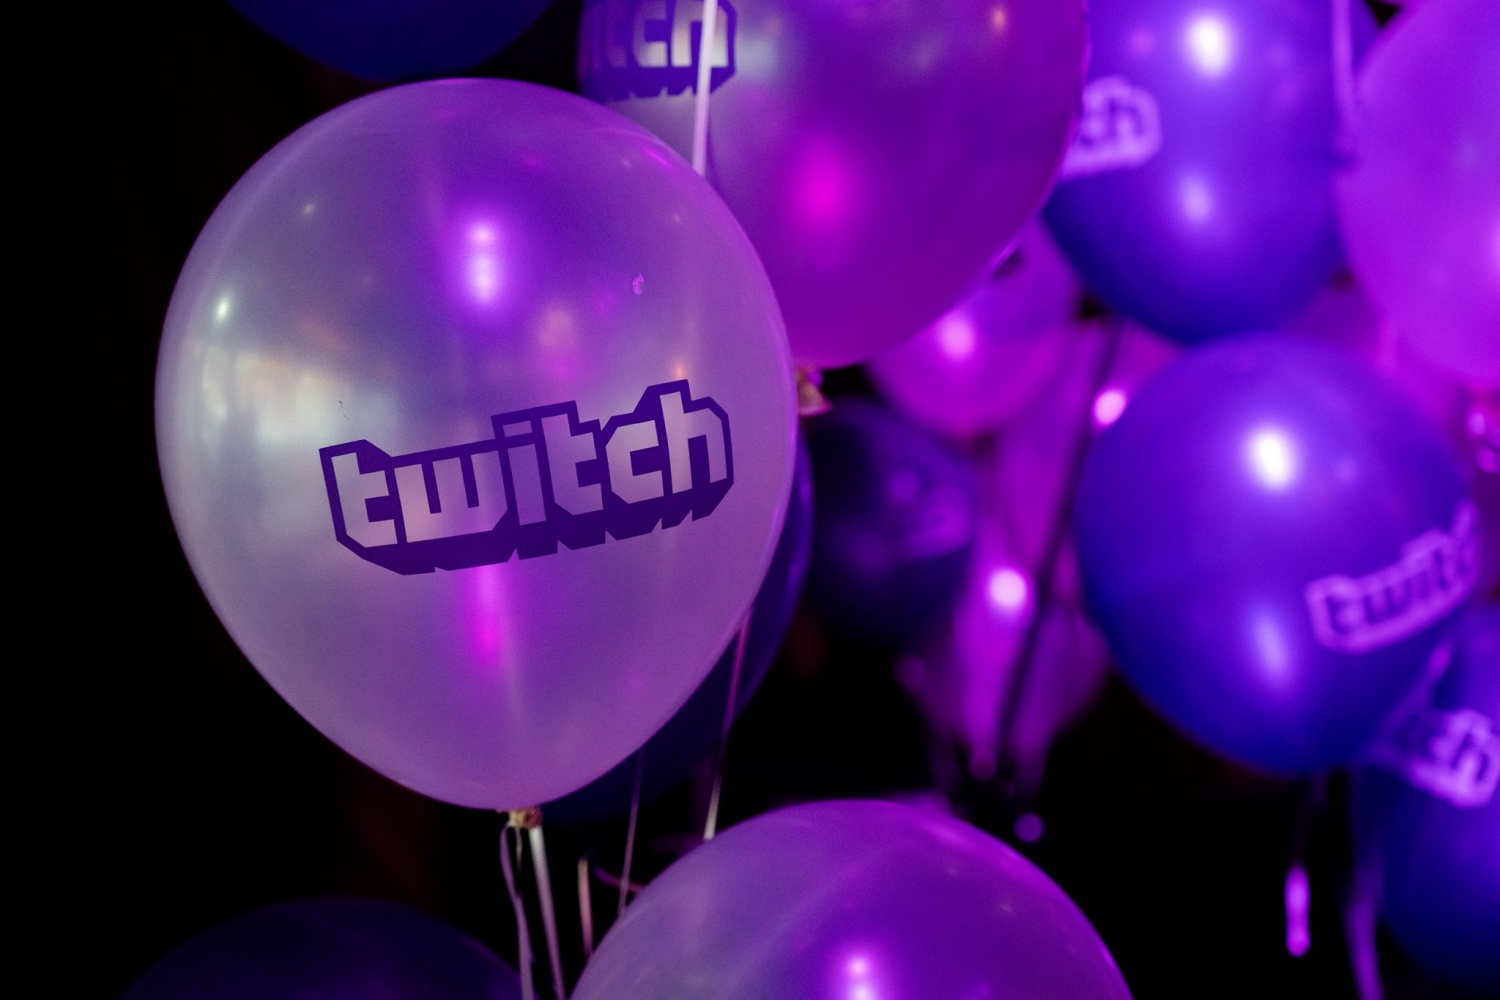 Twitch Will be Having Stream Aid 2020 This Weekend to Help Fight Coronavirus